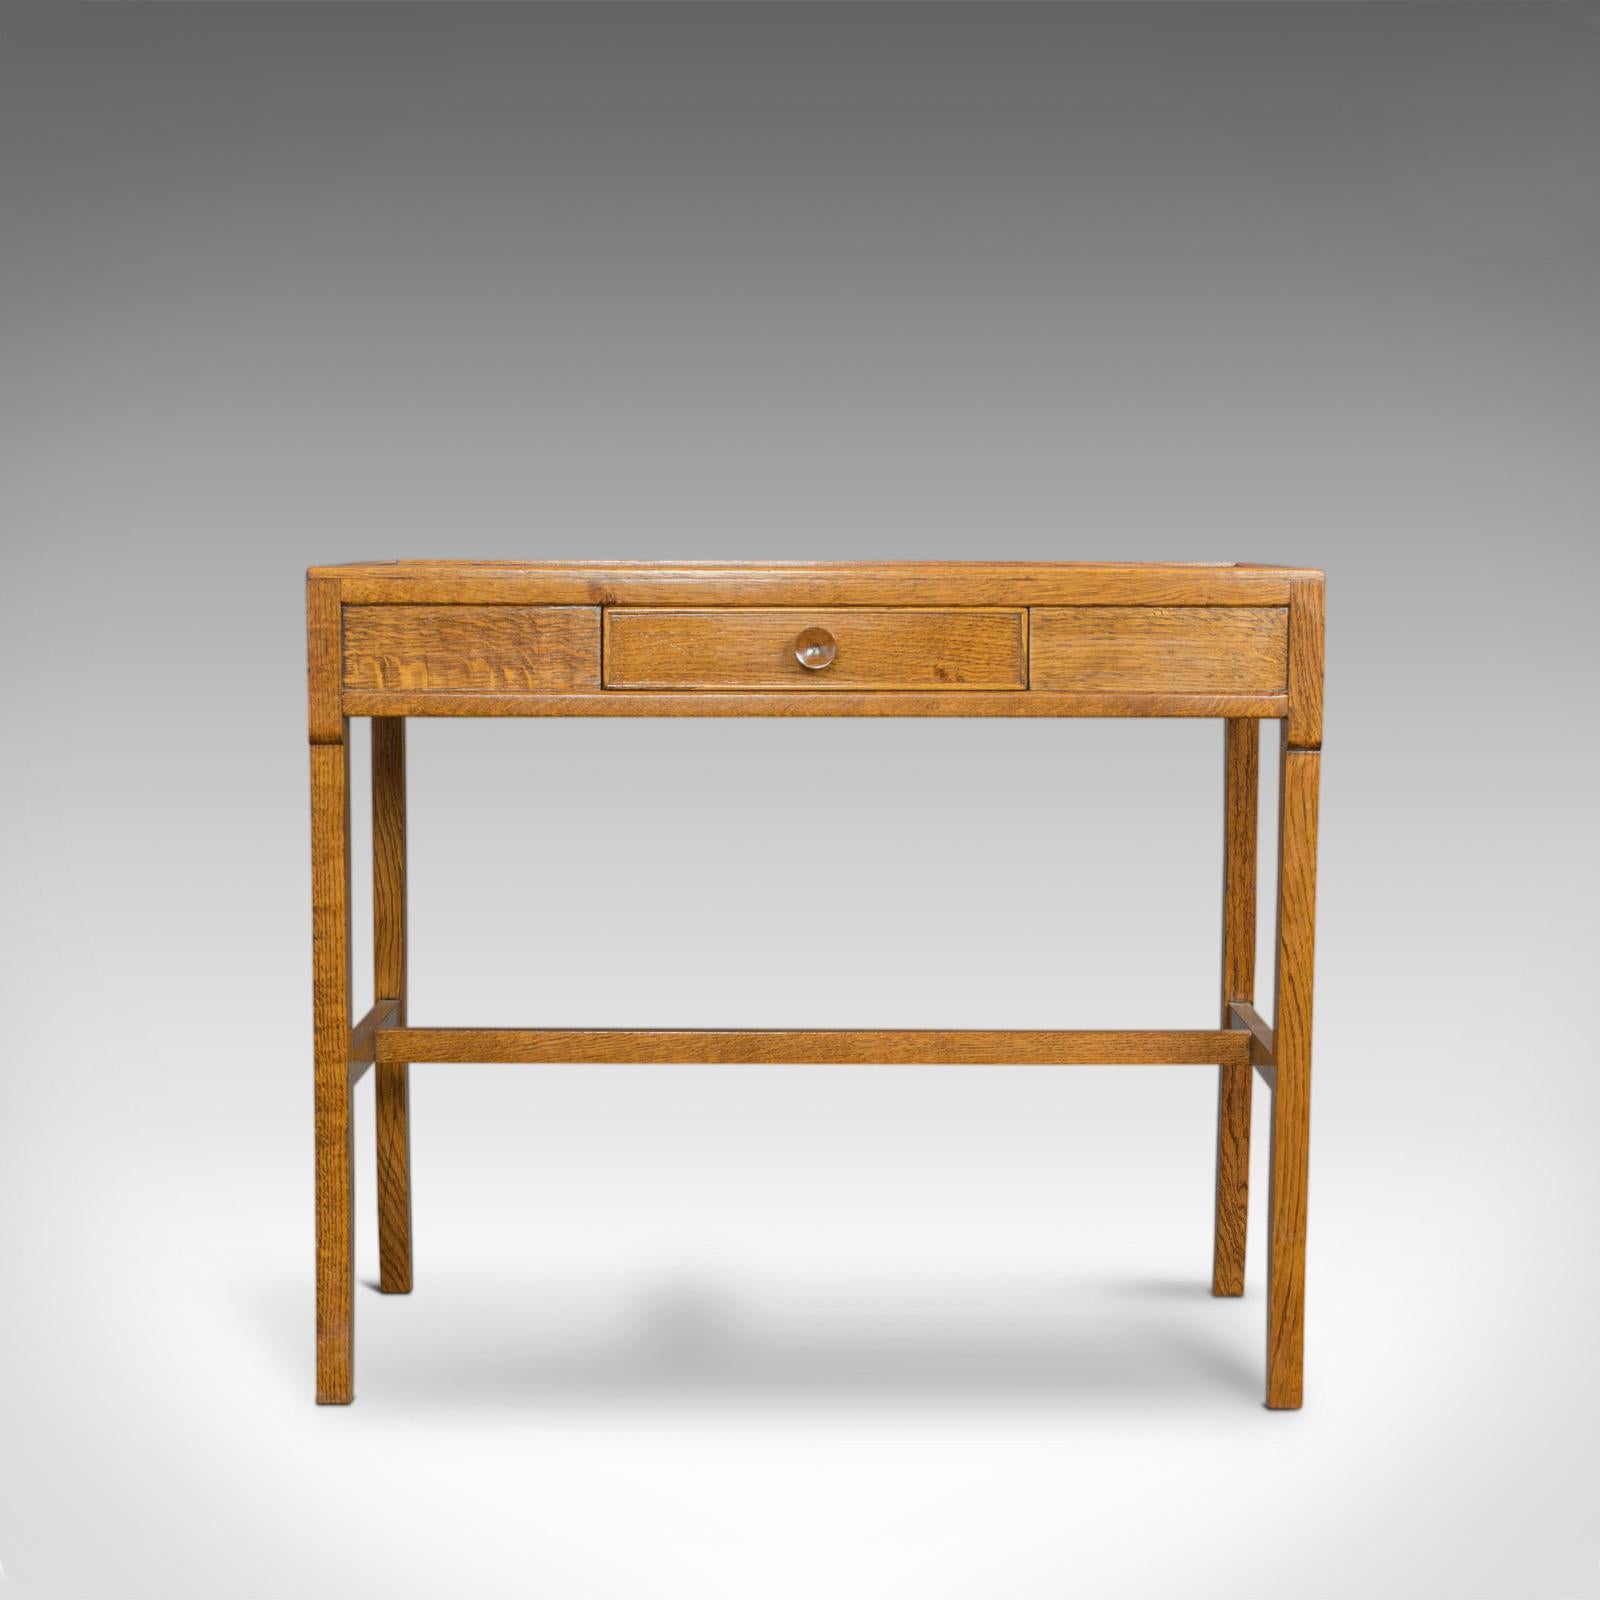 This is a vintage writing desk or side table. An English hall console table dating to the 20th century with Arts and Crafts overtones.

Select oak displays Fine grain interest and a desirable aged patina
Light caramel hues in a wax polished